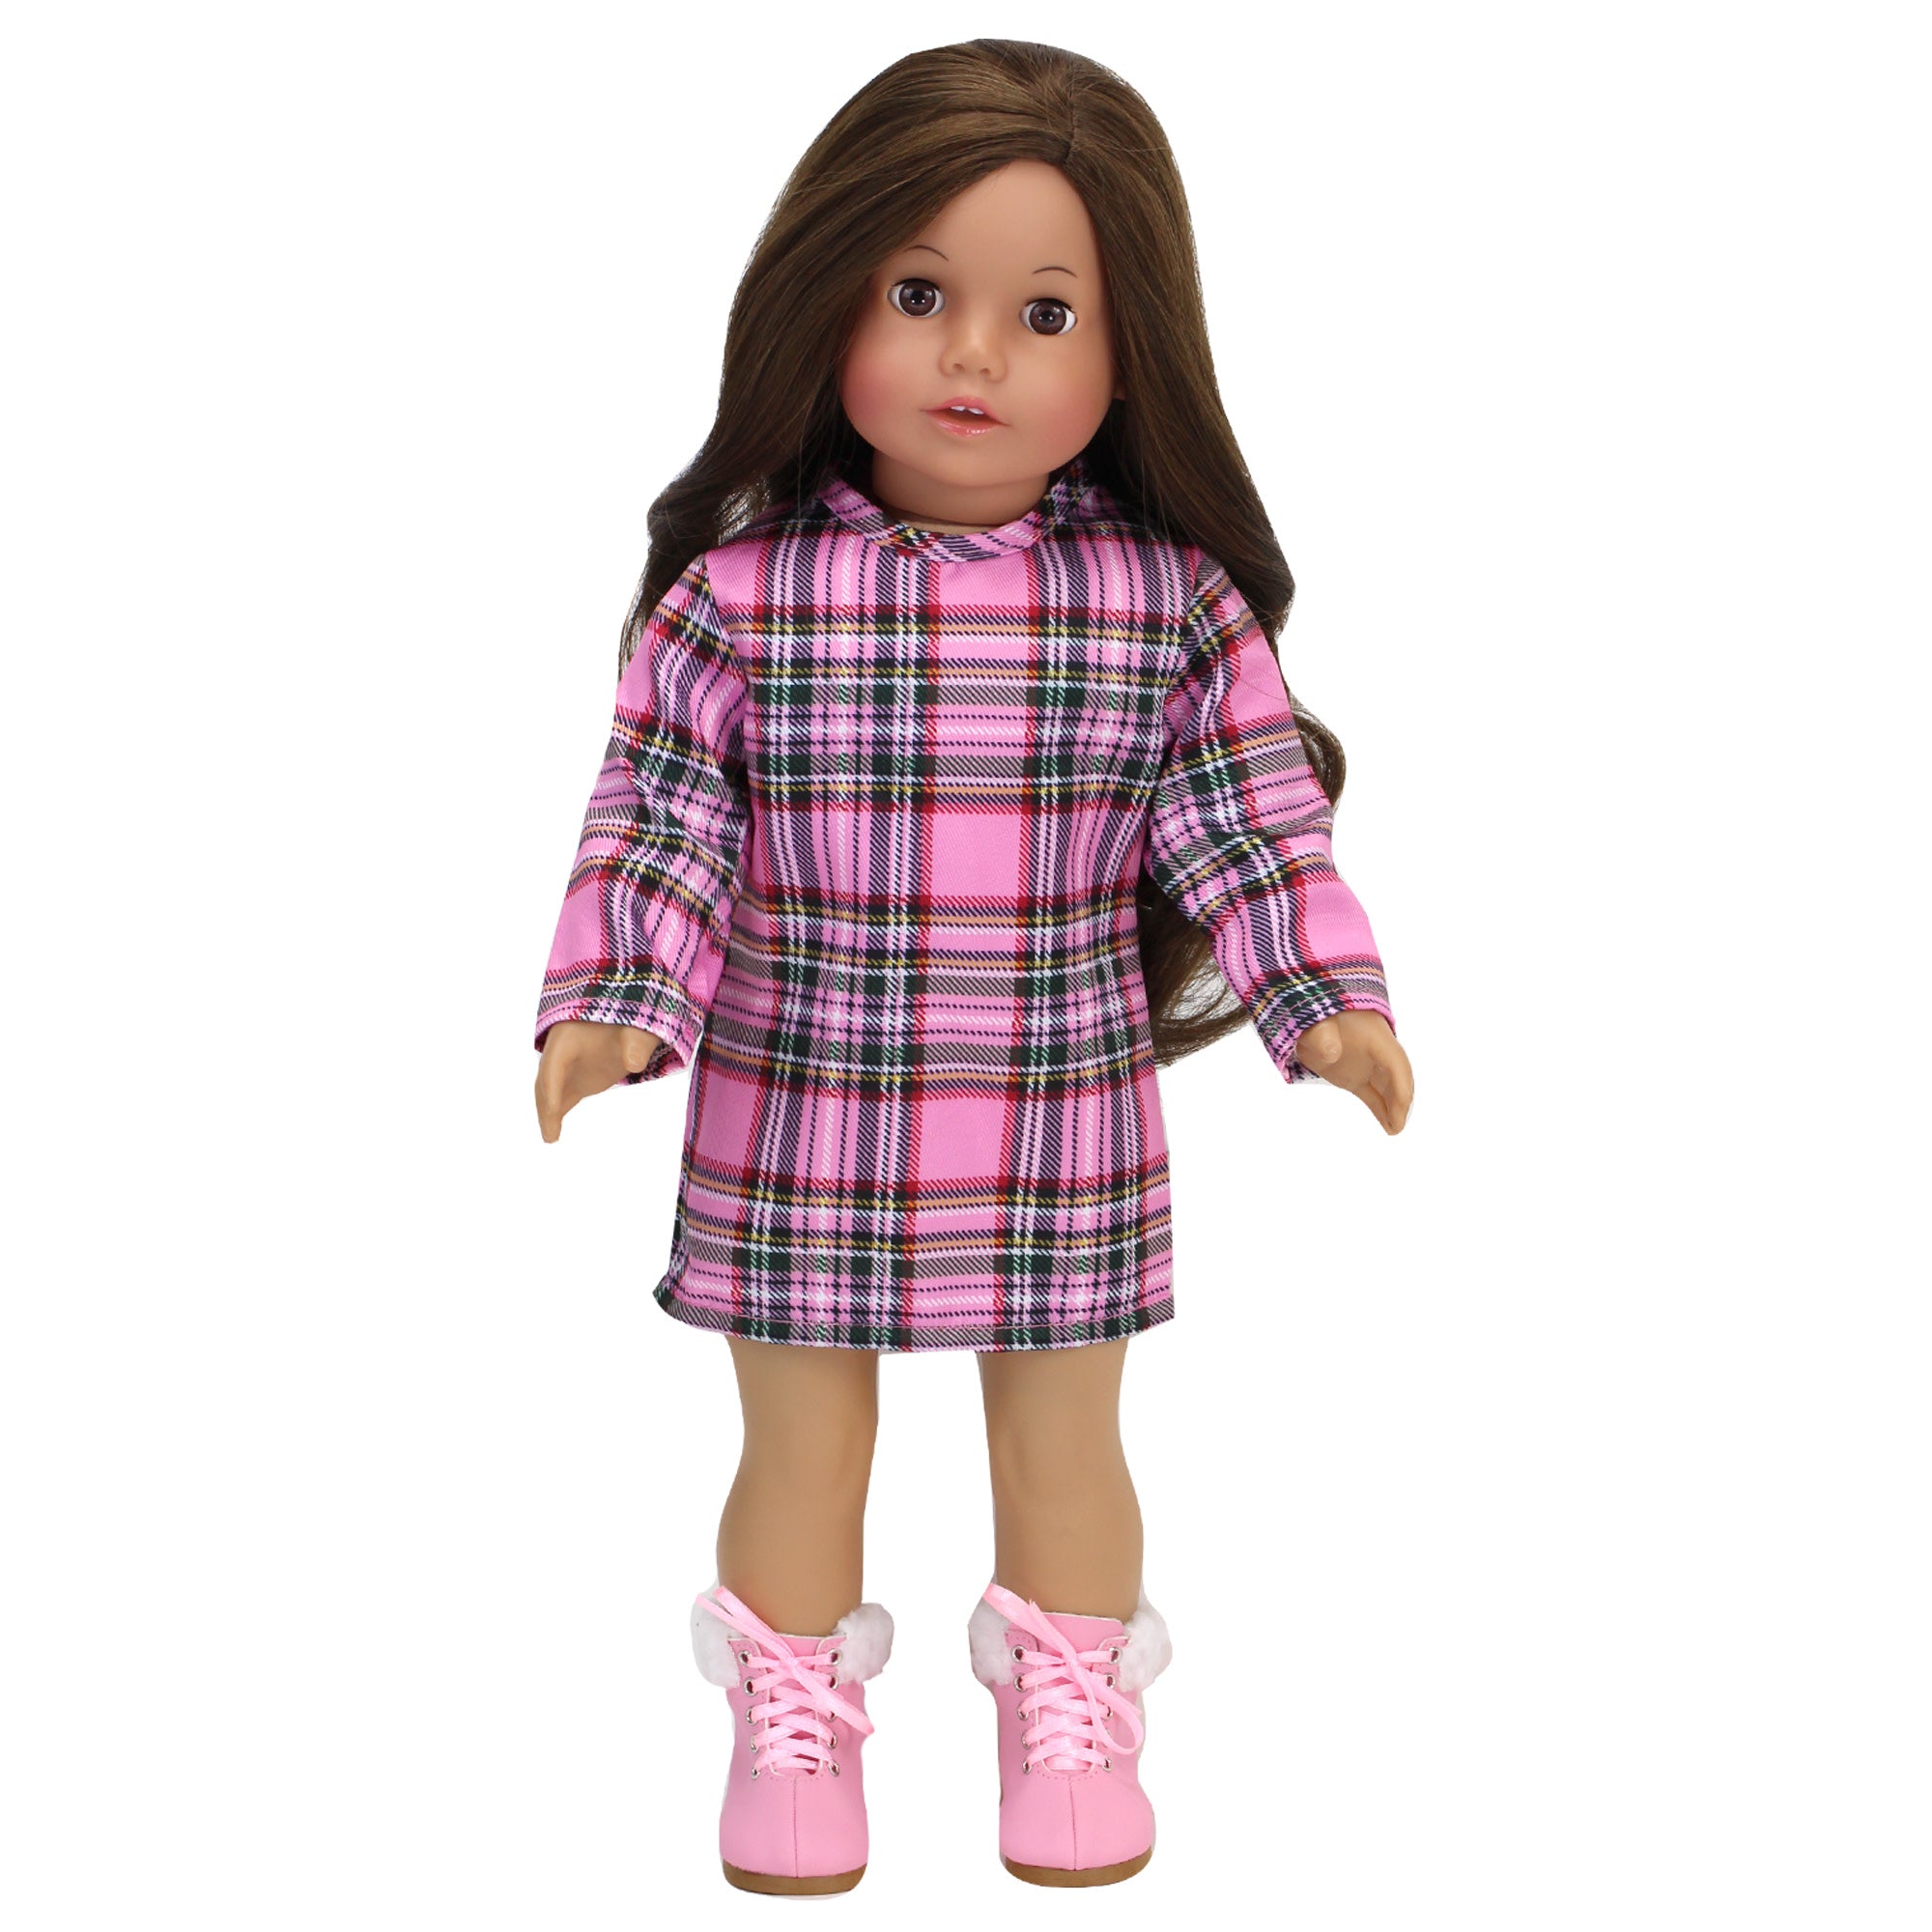 Sophia’s Complete Fall Outfit with Plaid Long-Sleeved Dress, faux fur-Trimmed Parka, & Lace-Up Booties for 18” Dolls, Pink/Green